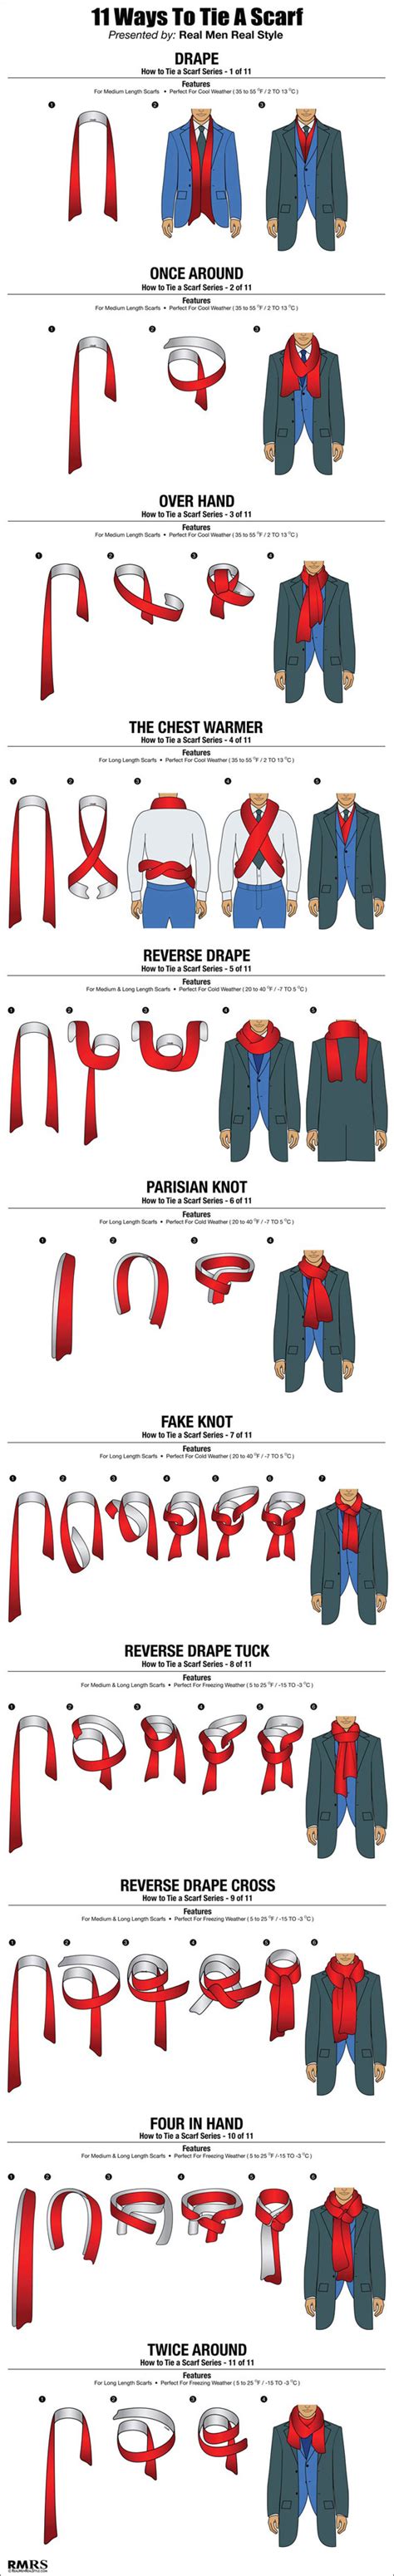 The problem is, that this is simply too short to tie scarves properly. 11 Ways A Guy Can Tie His Scarf